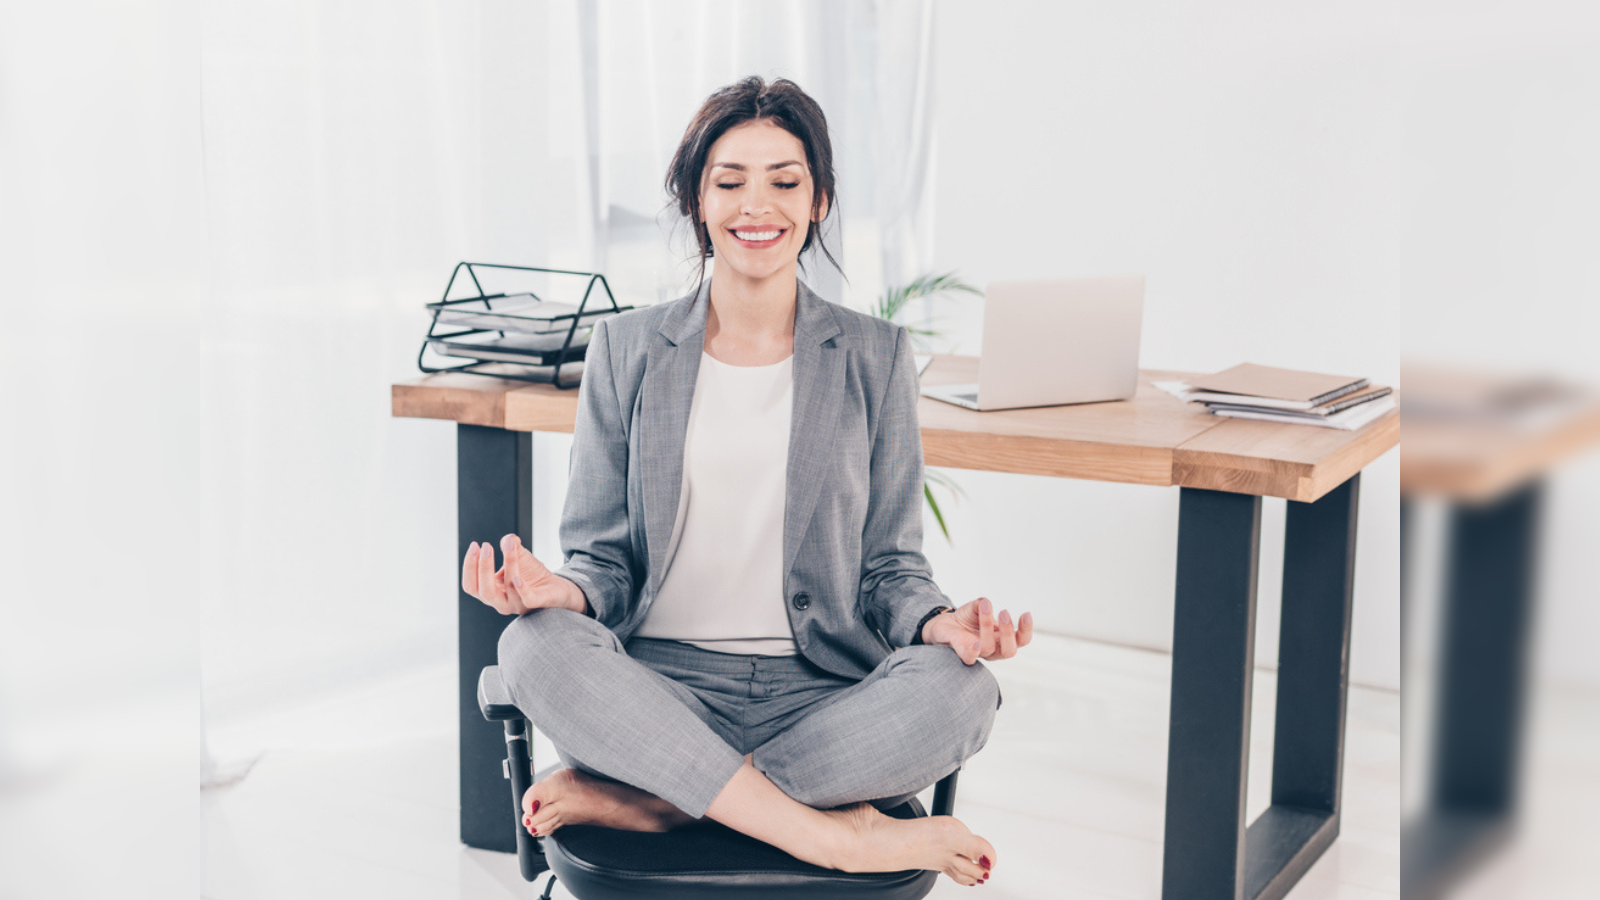 6 Office Yoga Poses for a Quick 